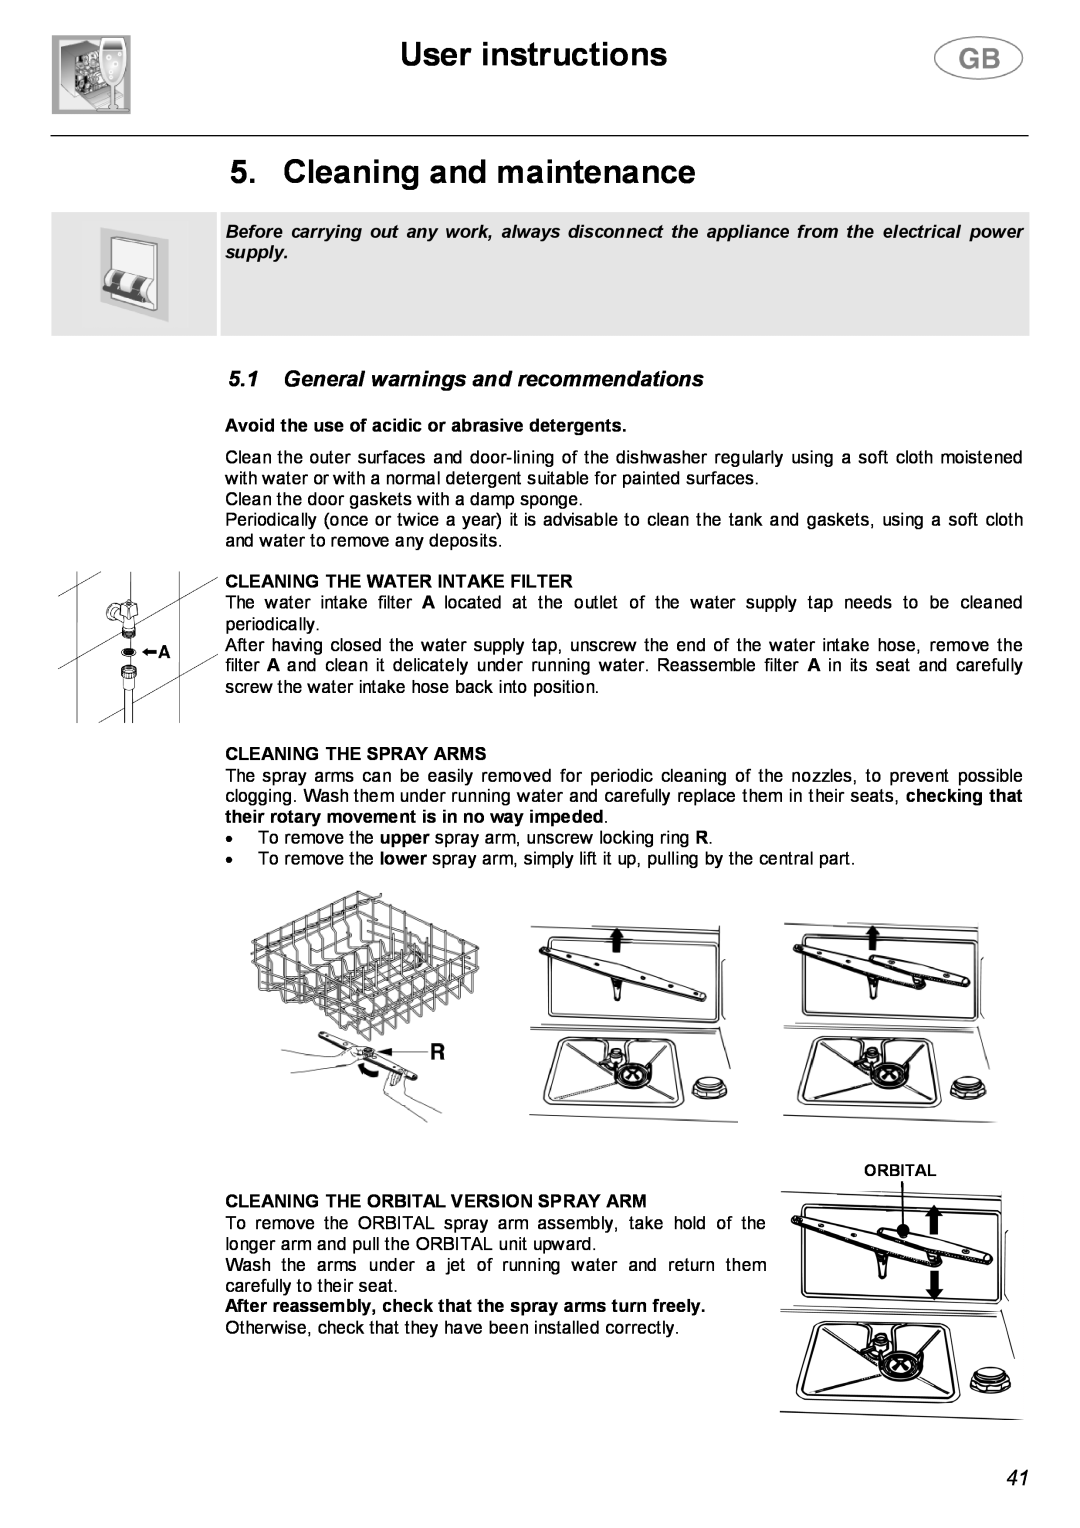 Smeg DWF66SS User instructions 5. Cleaning and maintenance, General warnings and recommendations, Cleaning The Spray Arms 